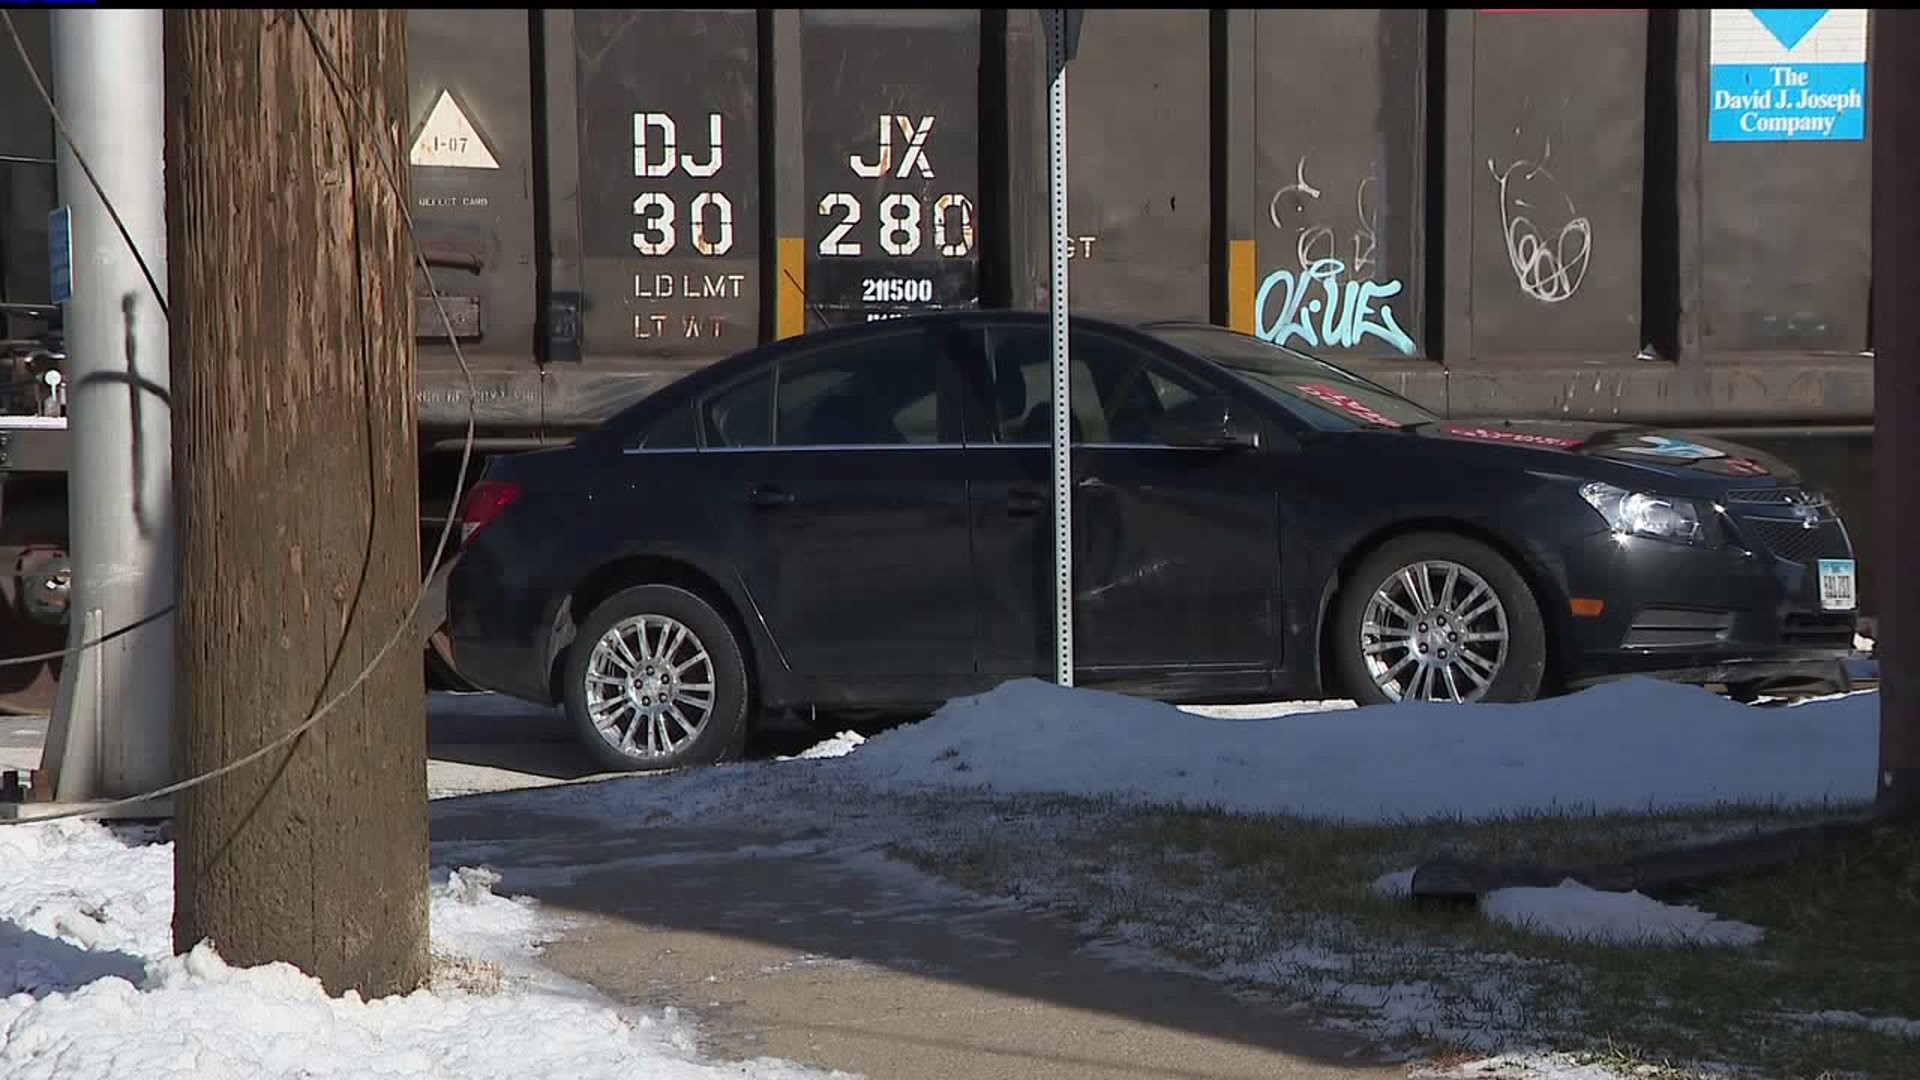 Car crashes trying to beat train